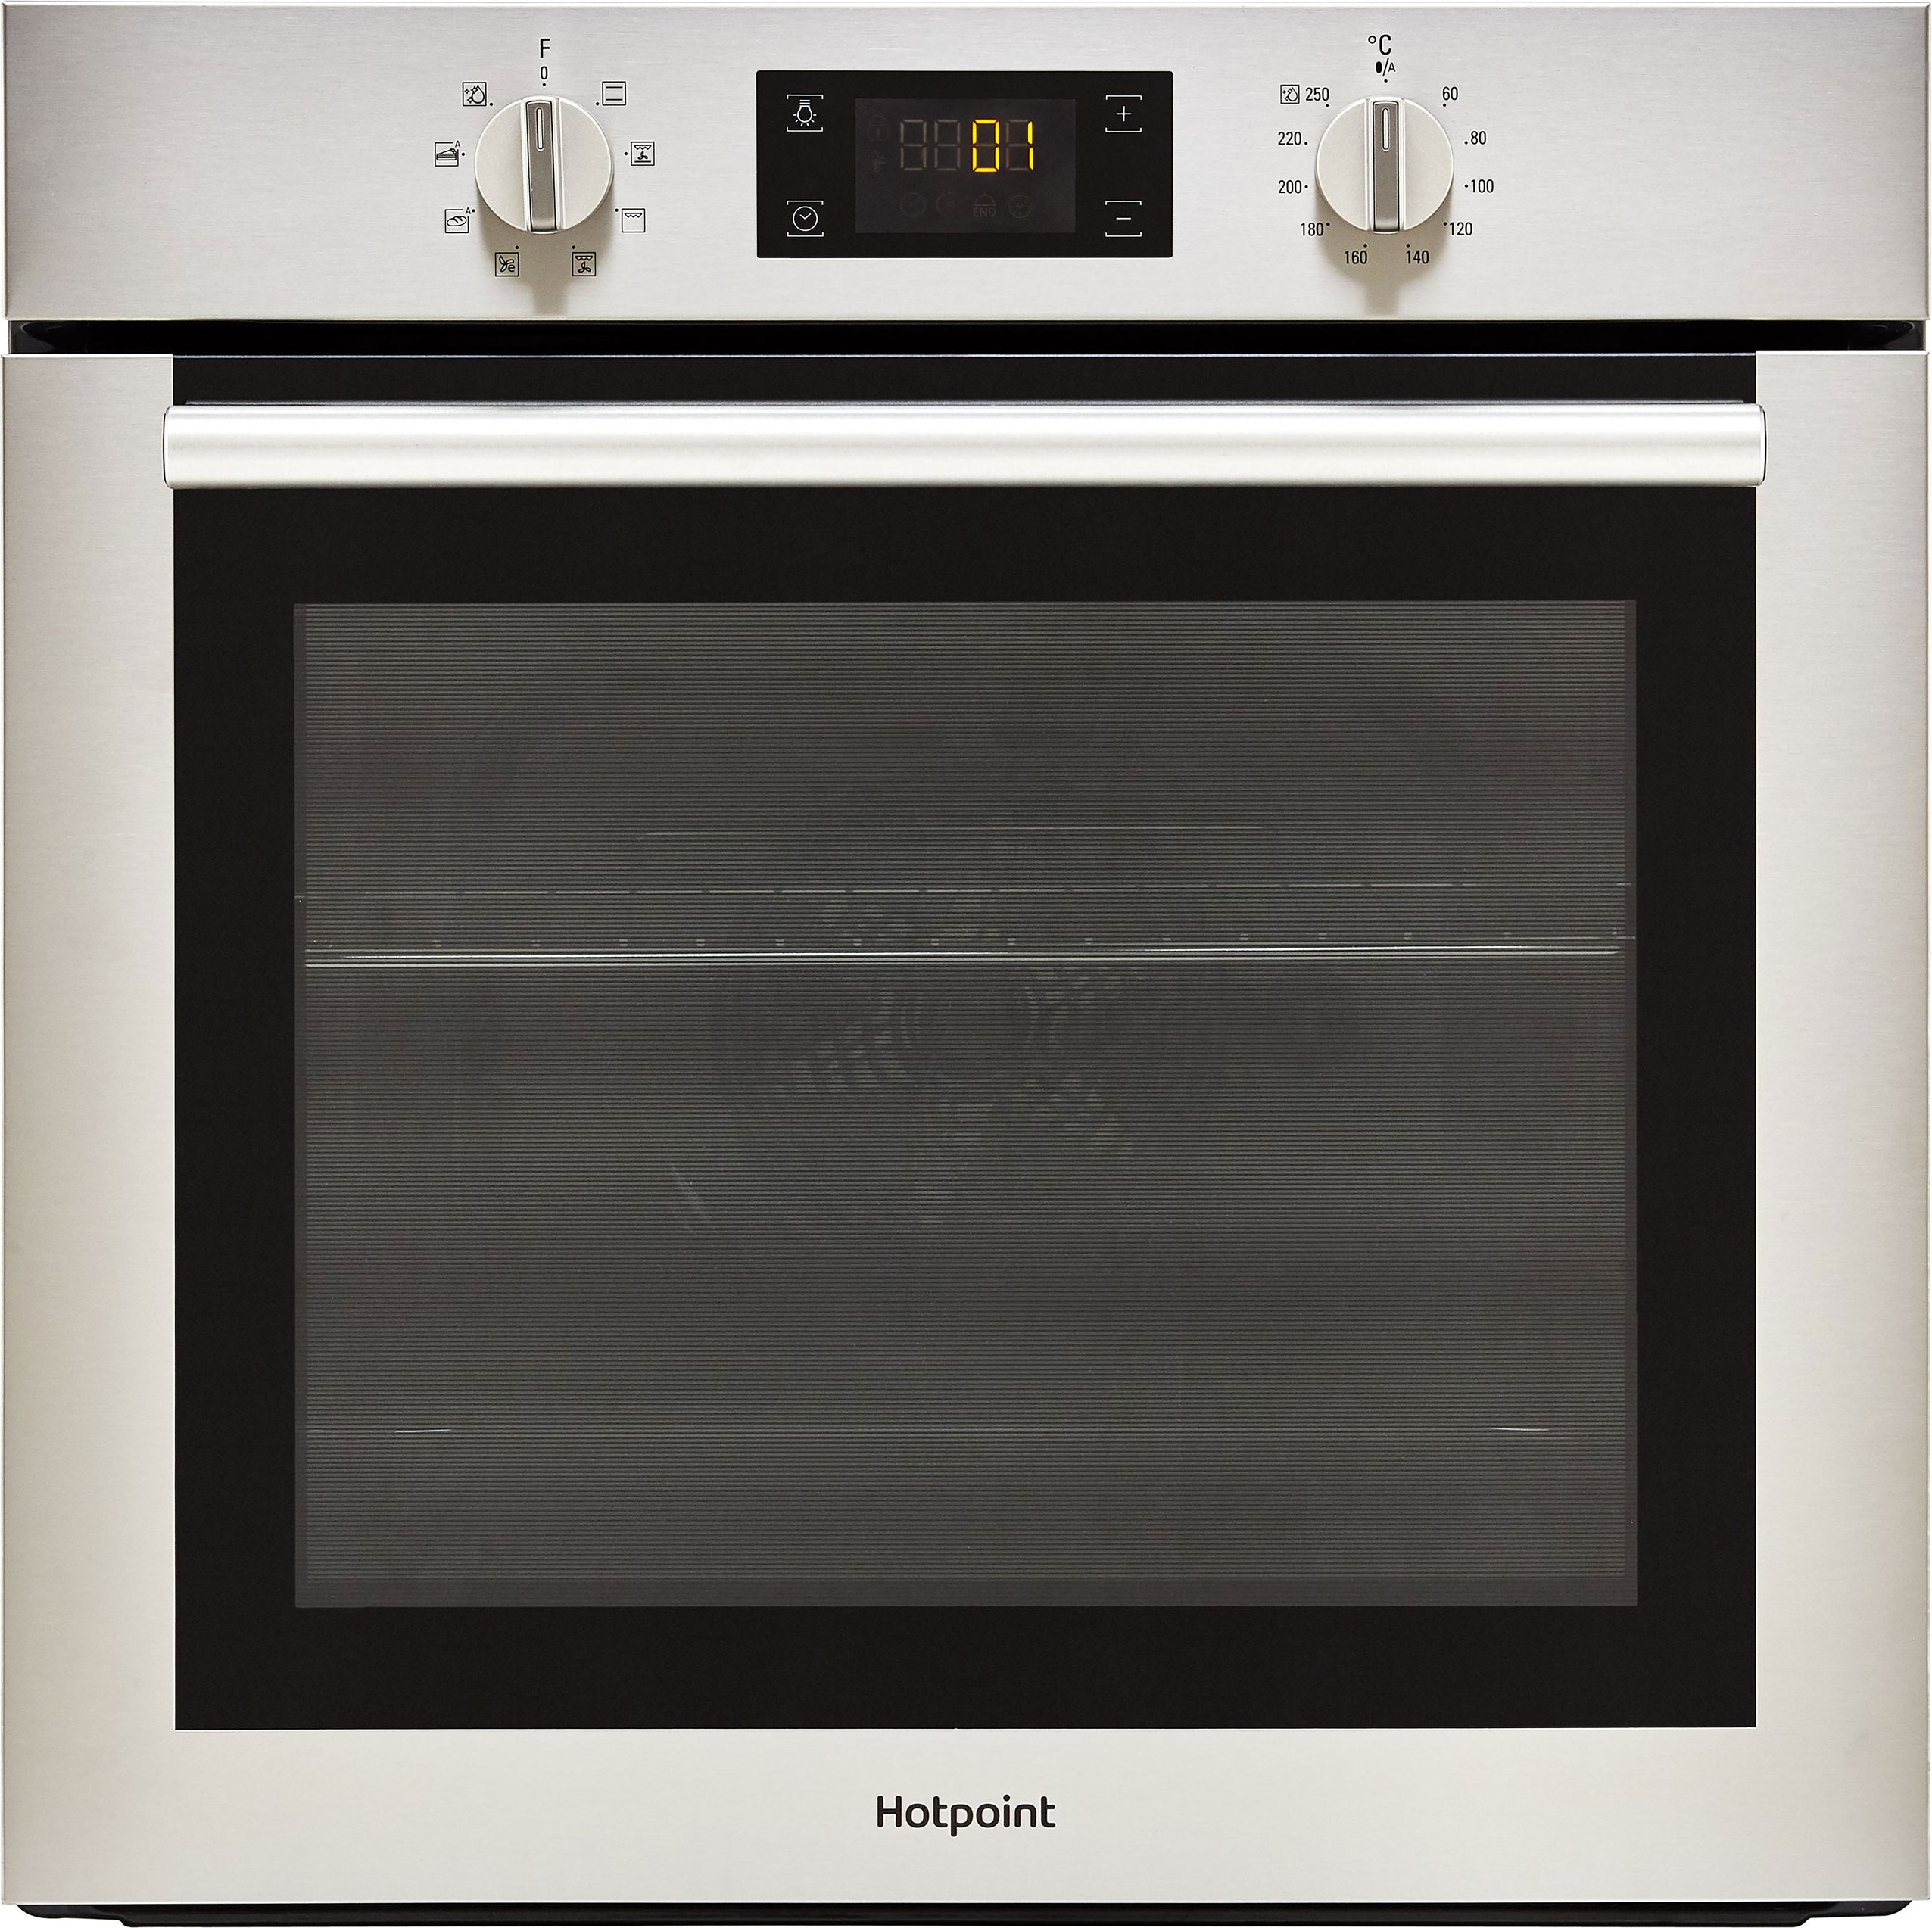 Hotpoint Class 4 SA4544HIX Built In Electric Single Oven - Stainless Steel - A Rated, Stainless Steel